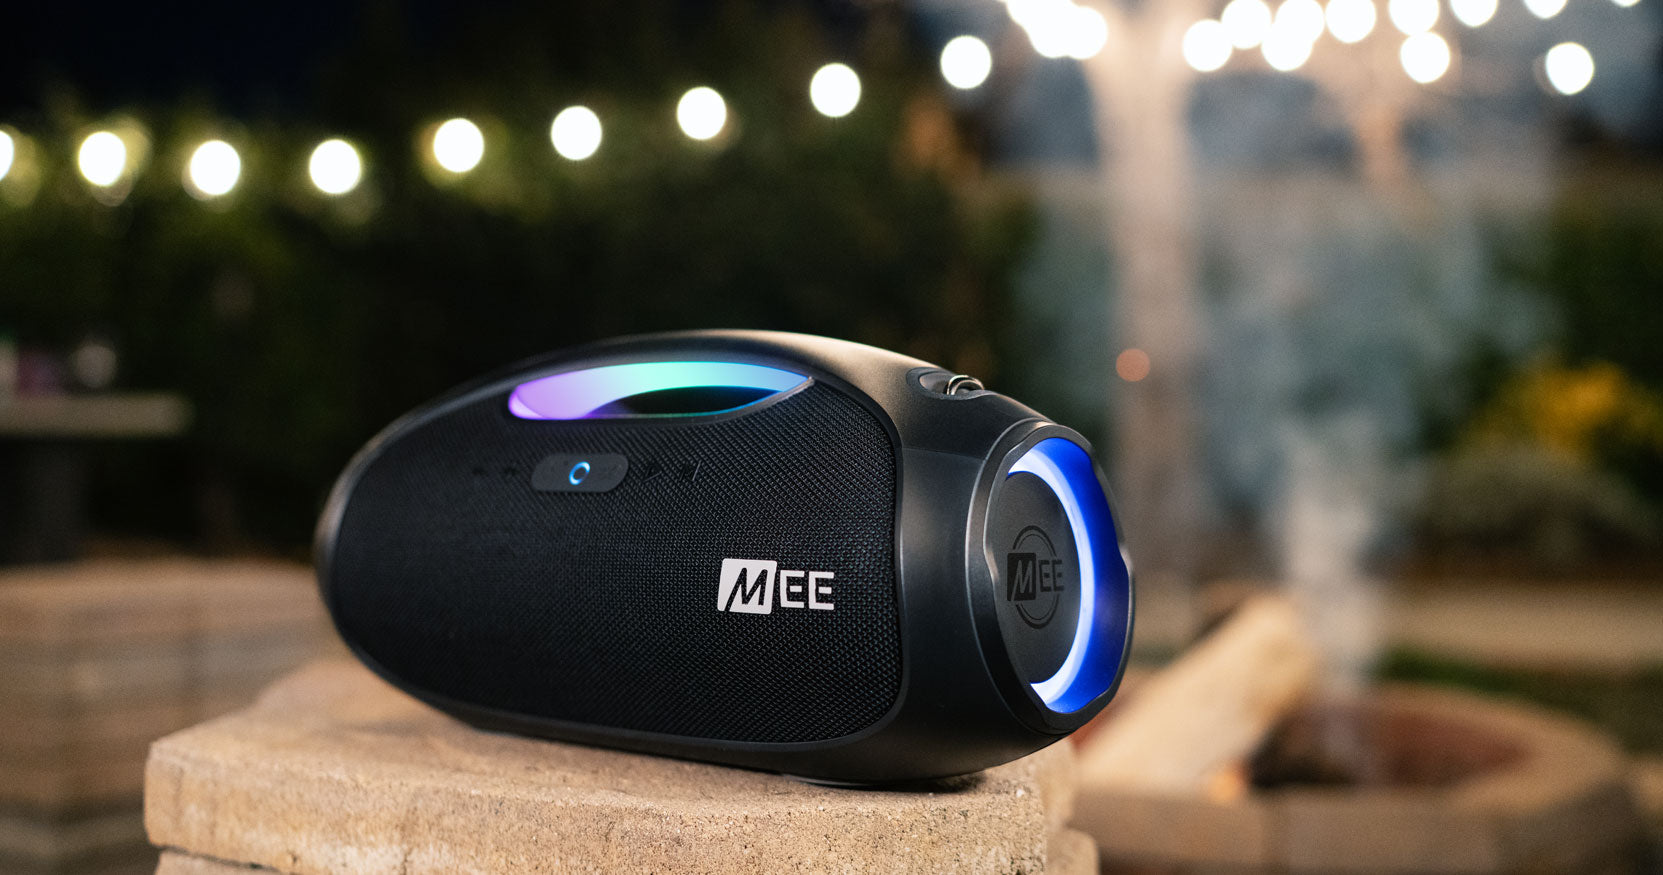 Portable bluetooth speaker with vibrant blue illumination, placed on an outdoor stone ledge, illuminated by background string lights at dusk.